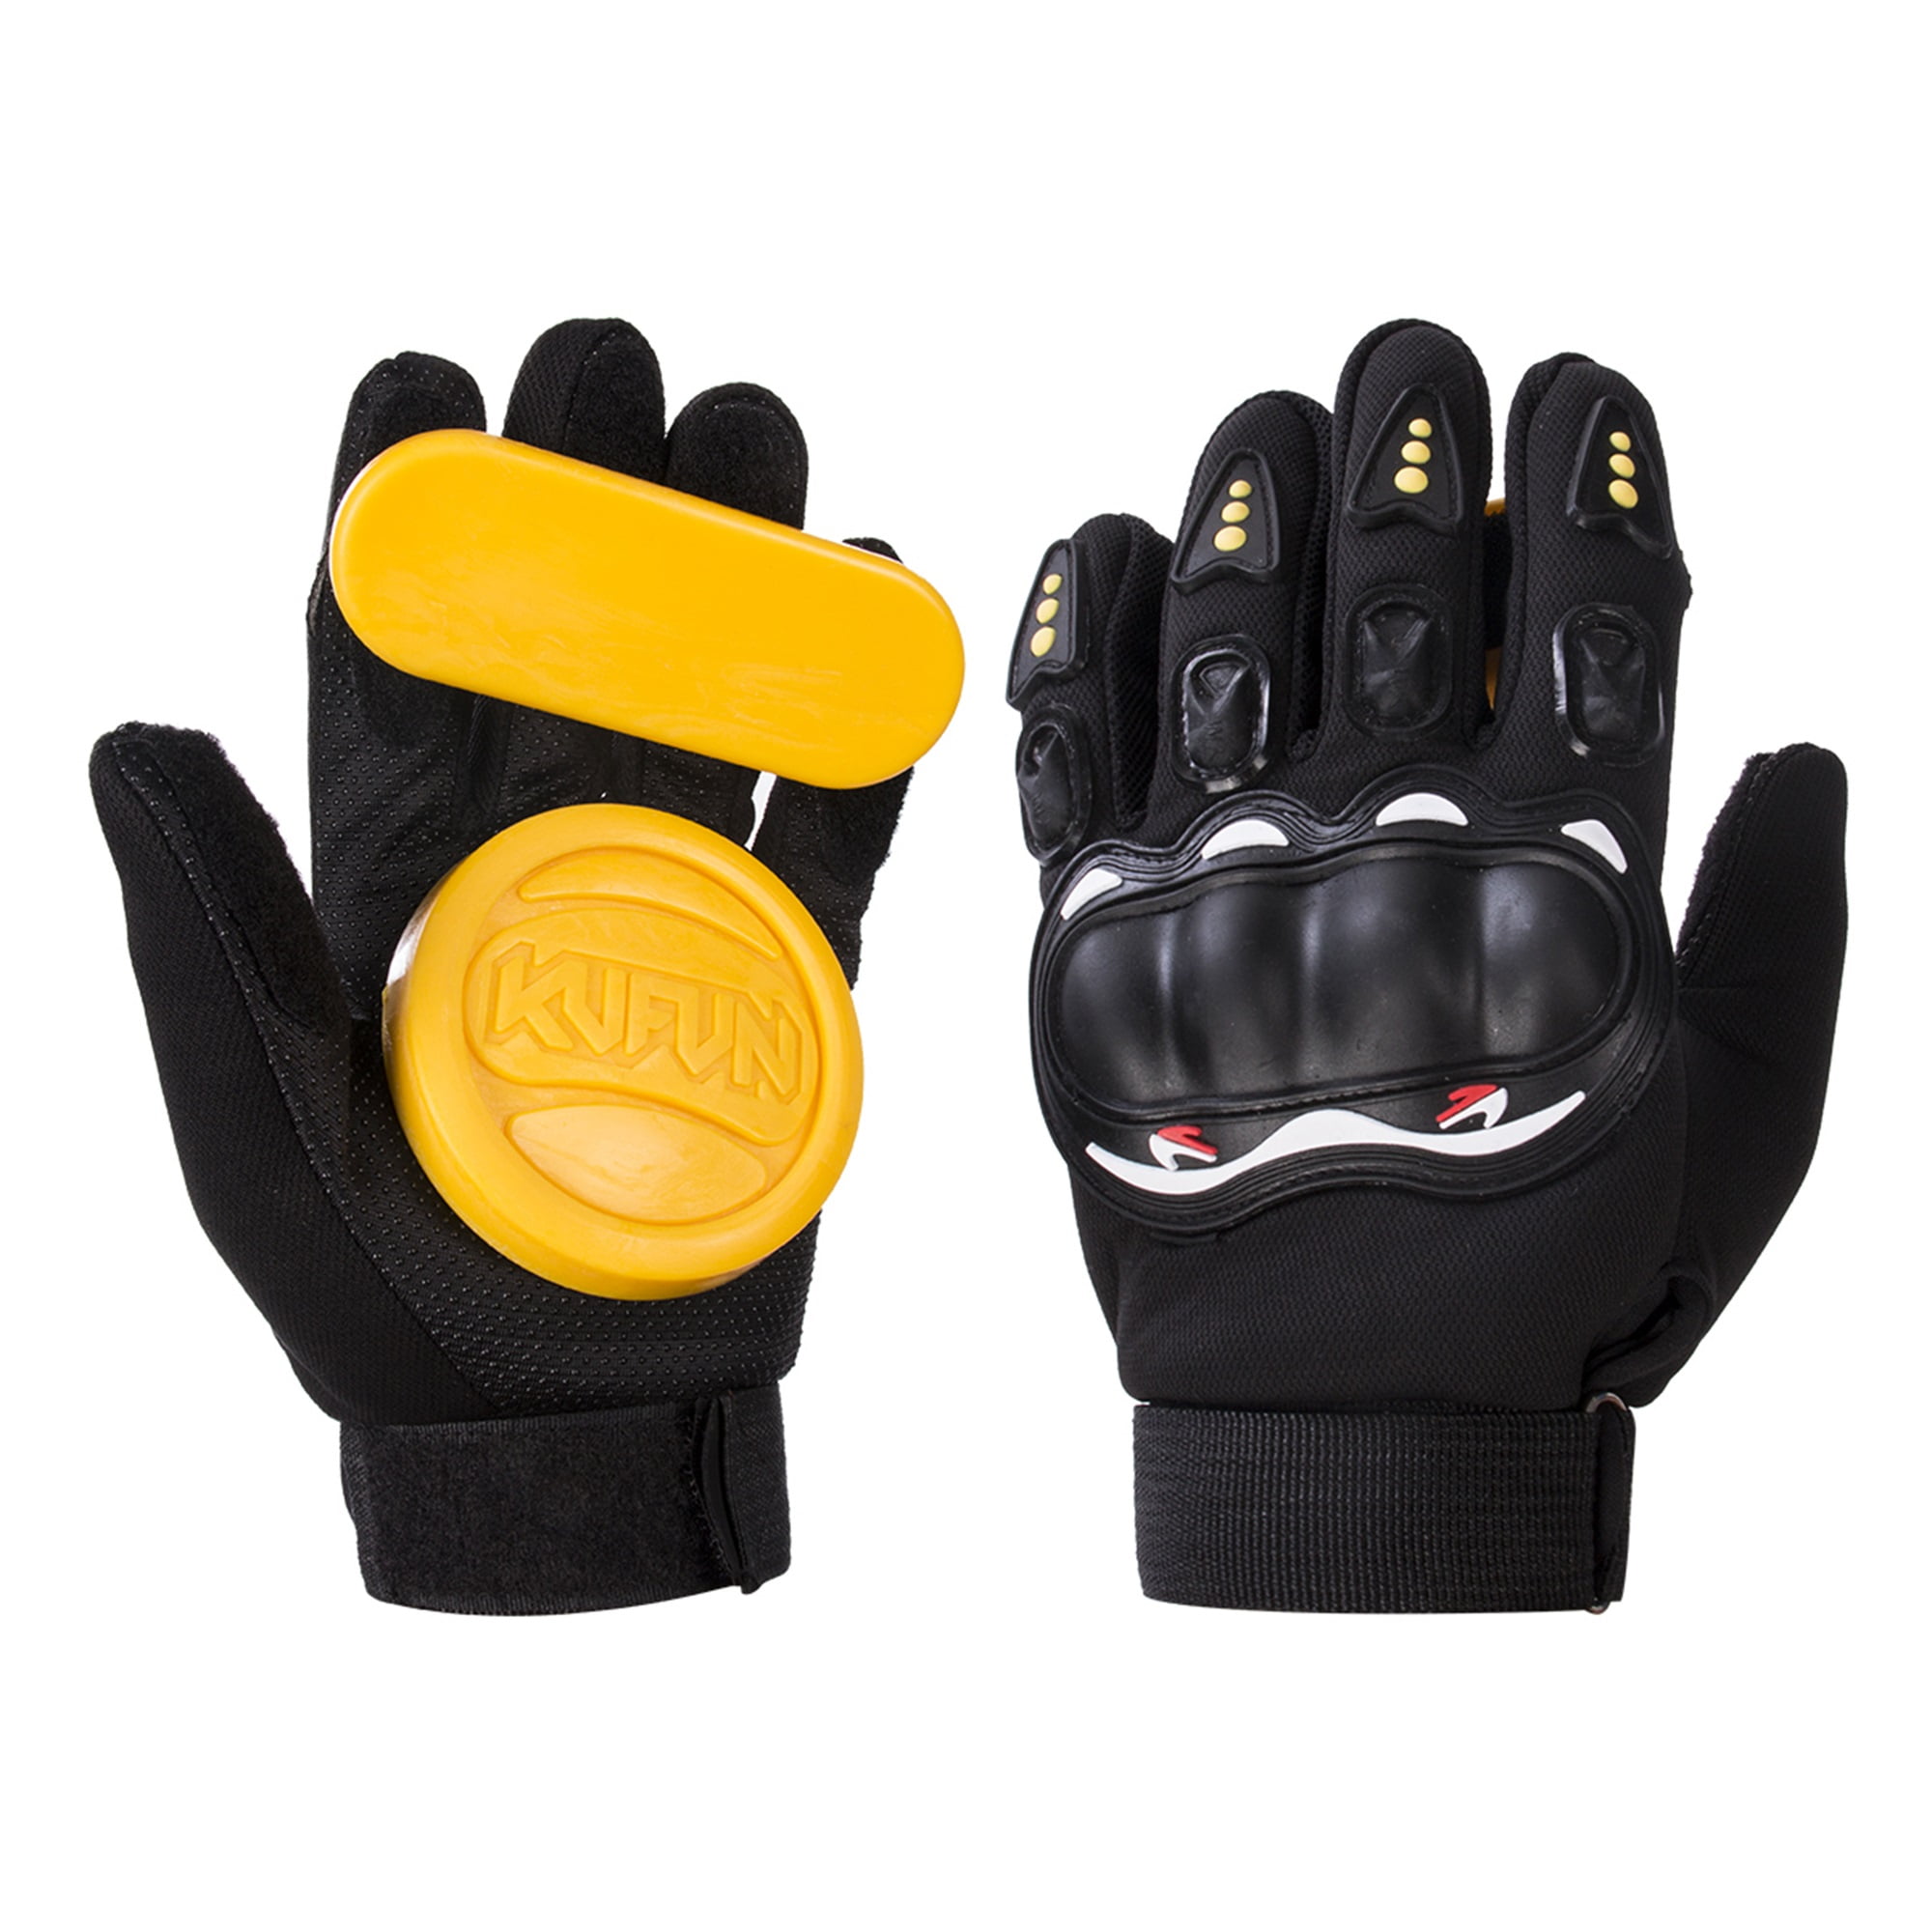 Profession Skateboard Gloves,Skateboard Gloves with Long board Downhill Slide Gloves Gloves Three Colors Available - Walmart.com